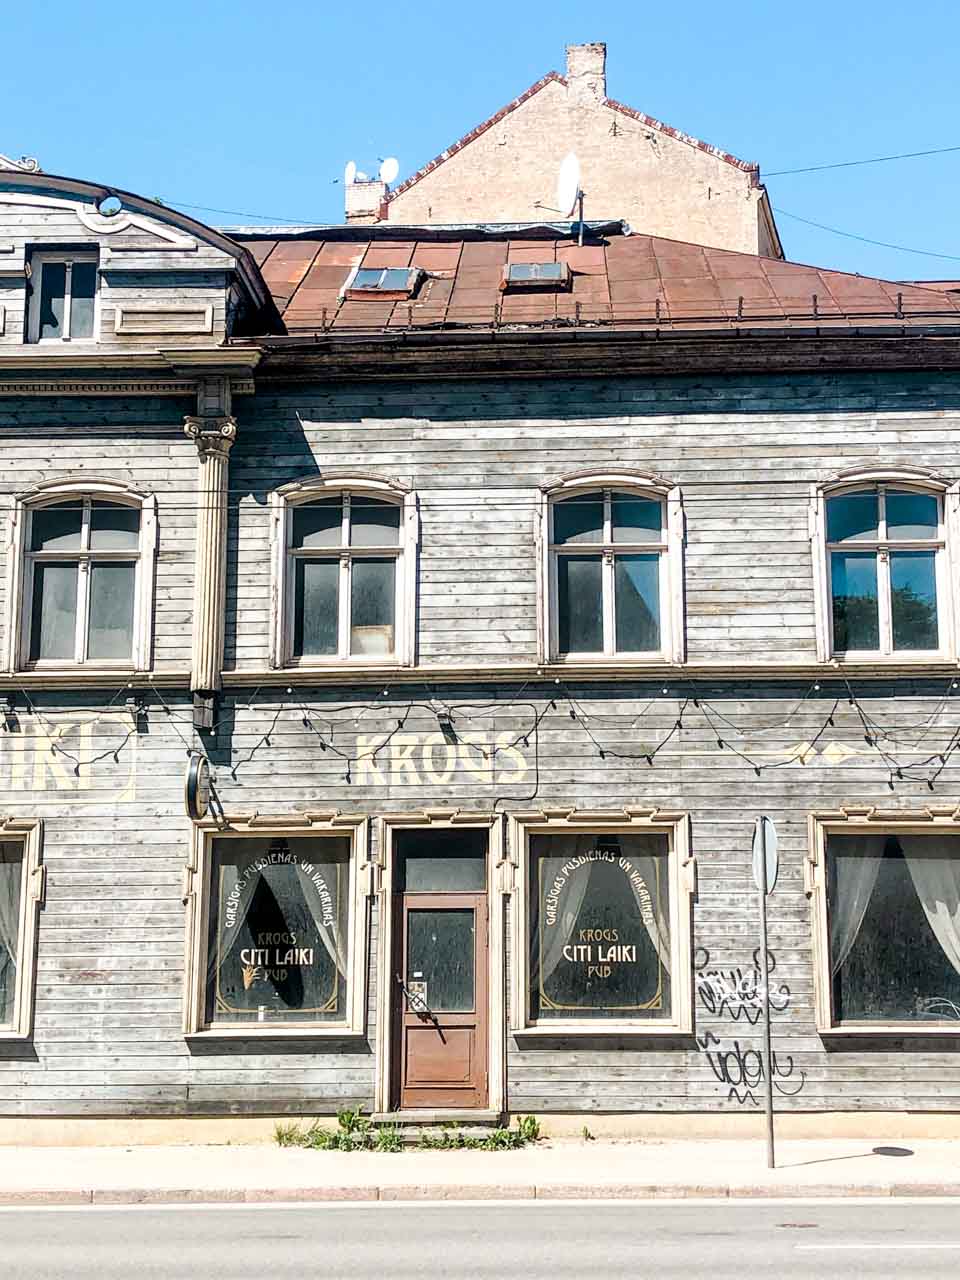 An old wooden building in Riga, Latvia